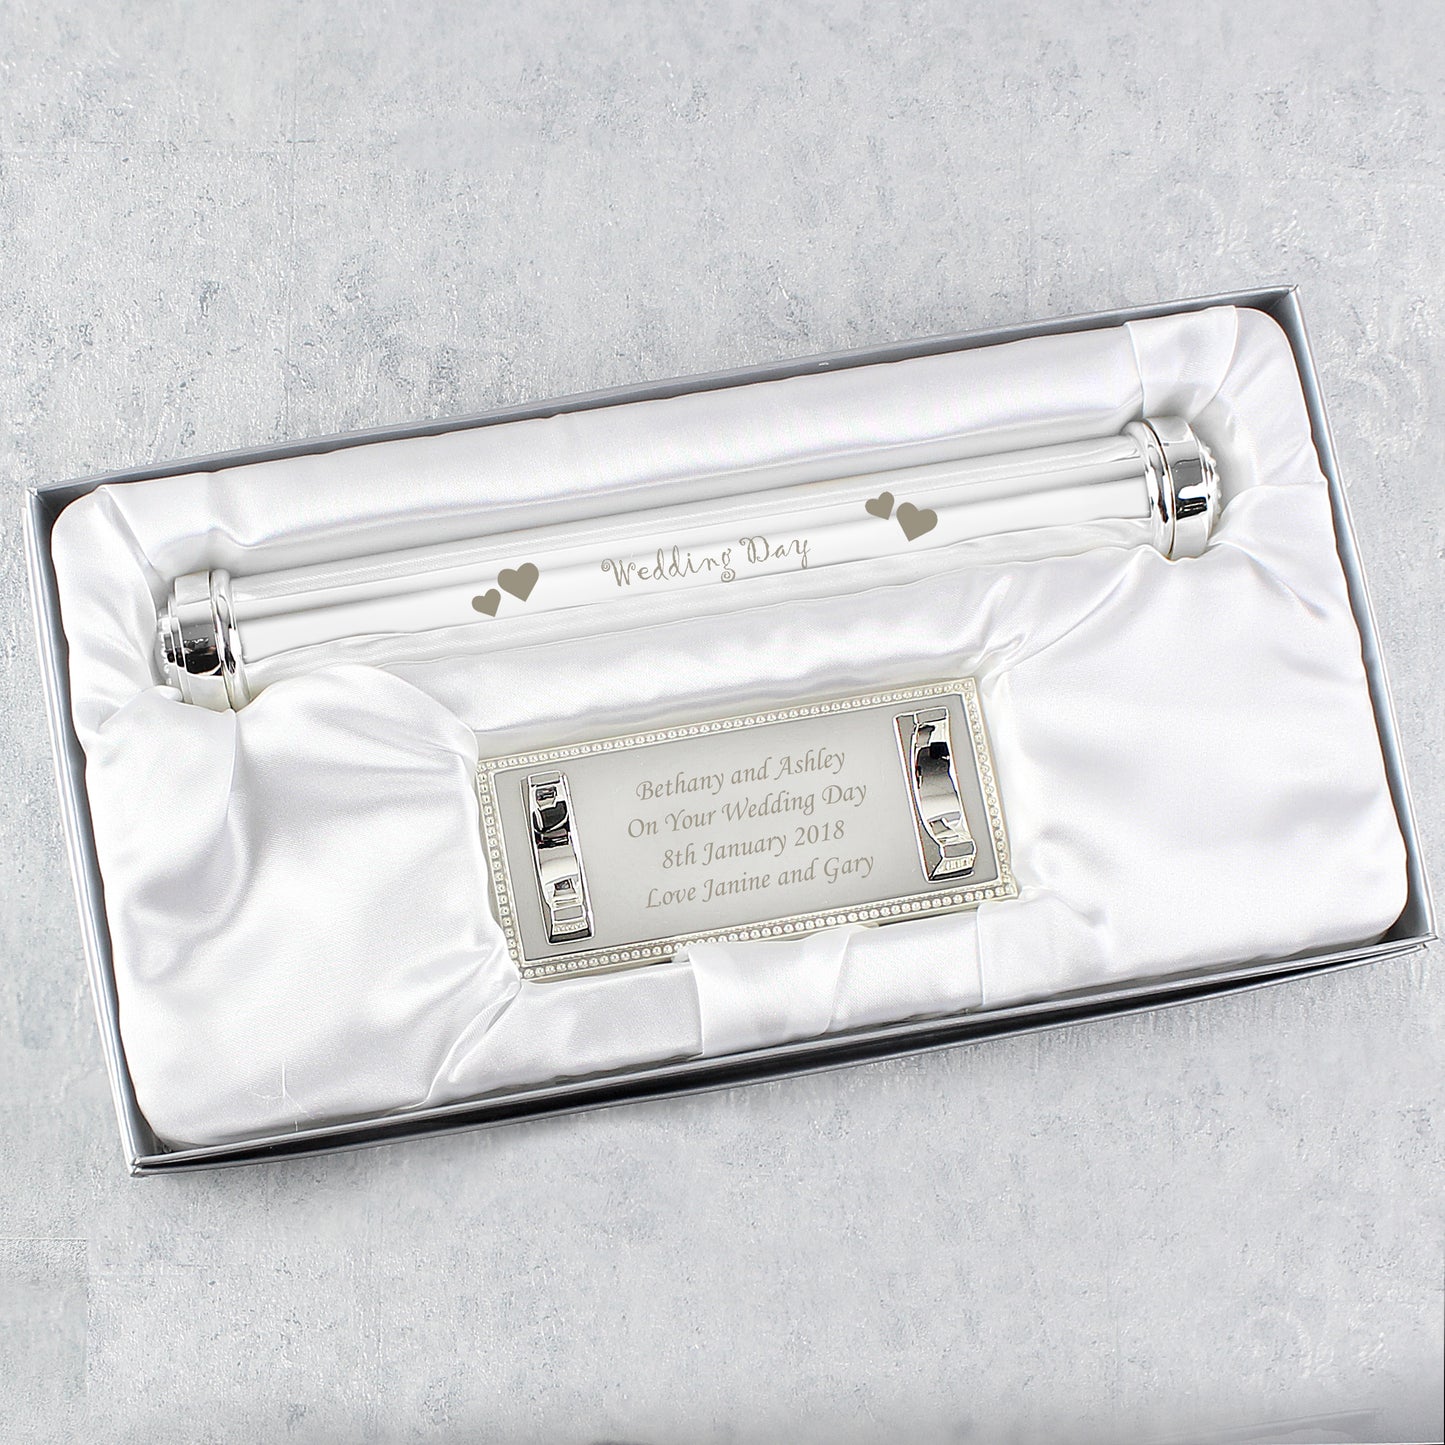 Personalised Wedding Day Silver Plated Certificate Holder - Personalise It!